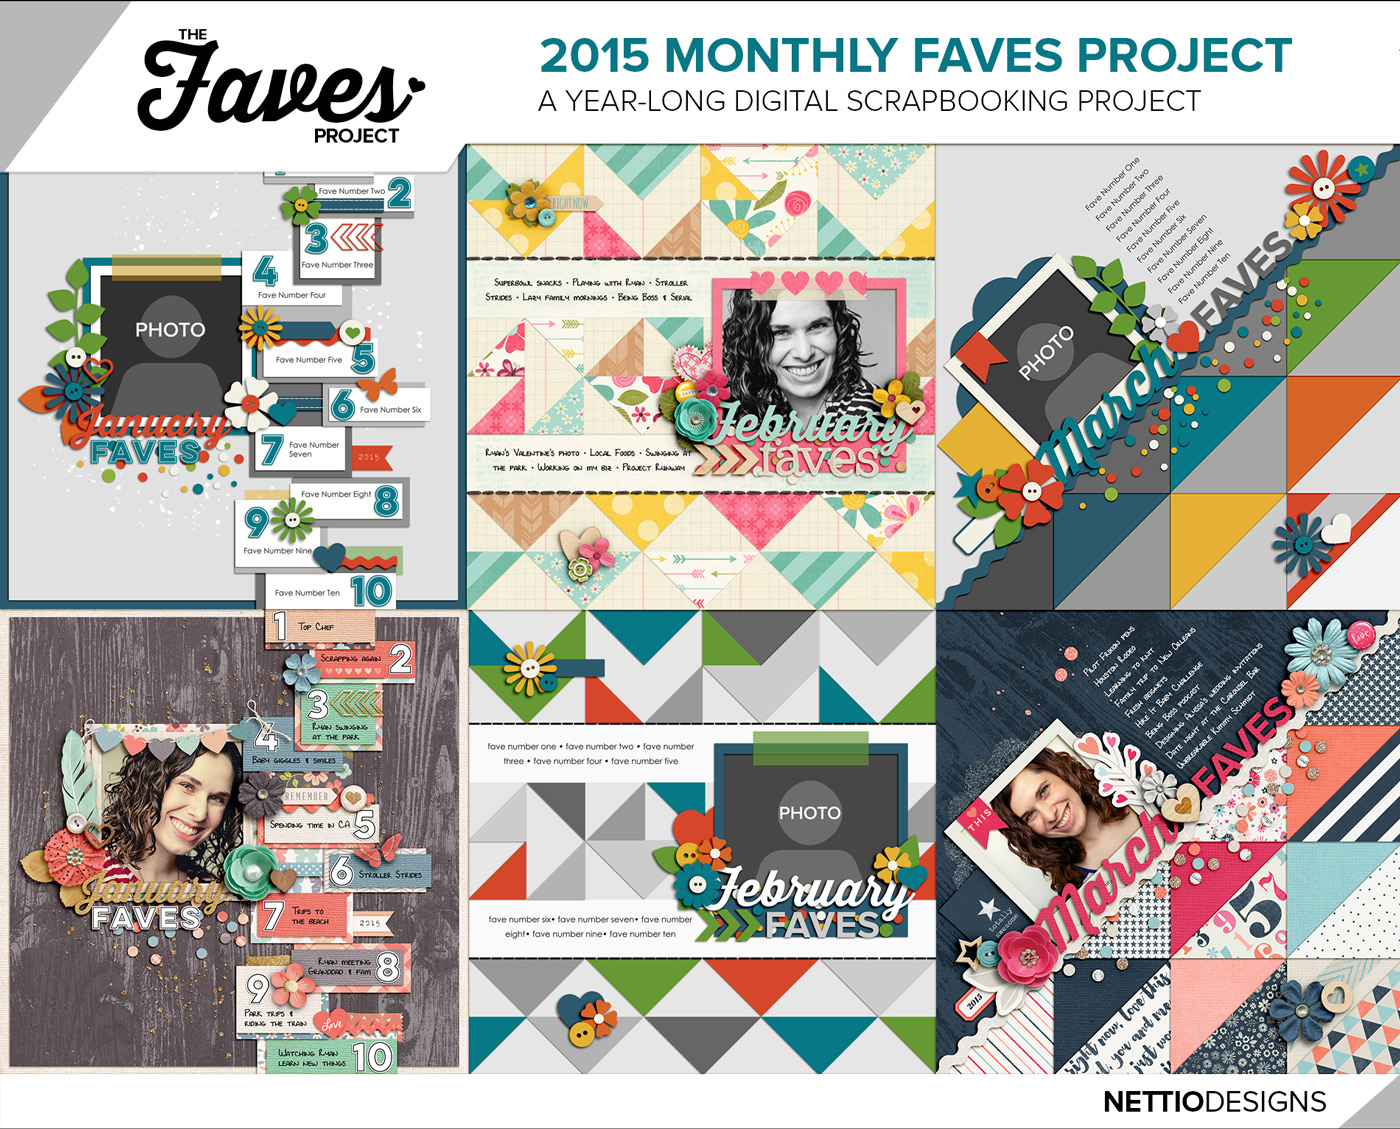 nettiodesigns-faves-threemonths-new